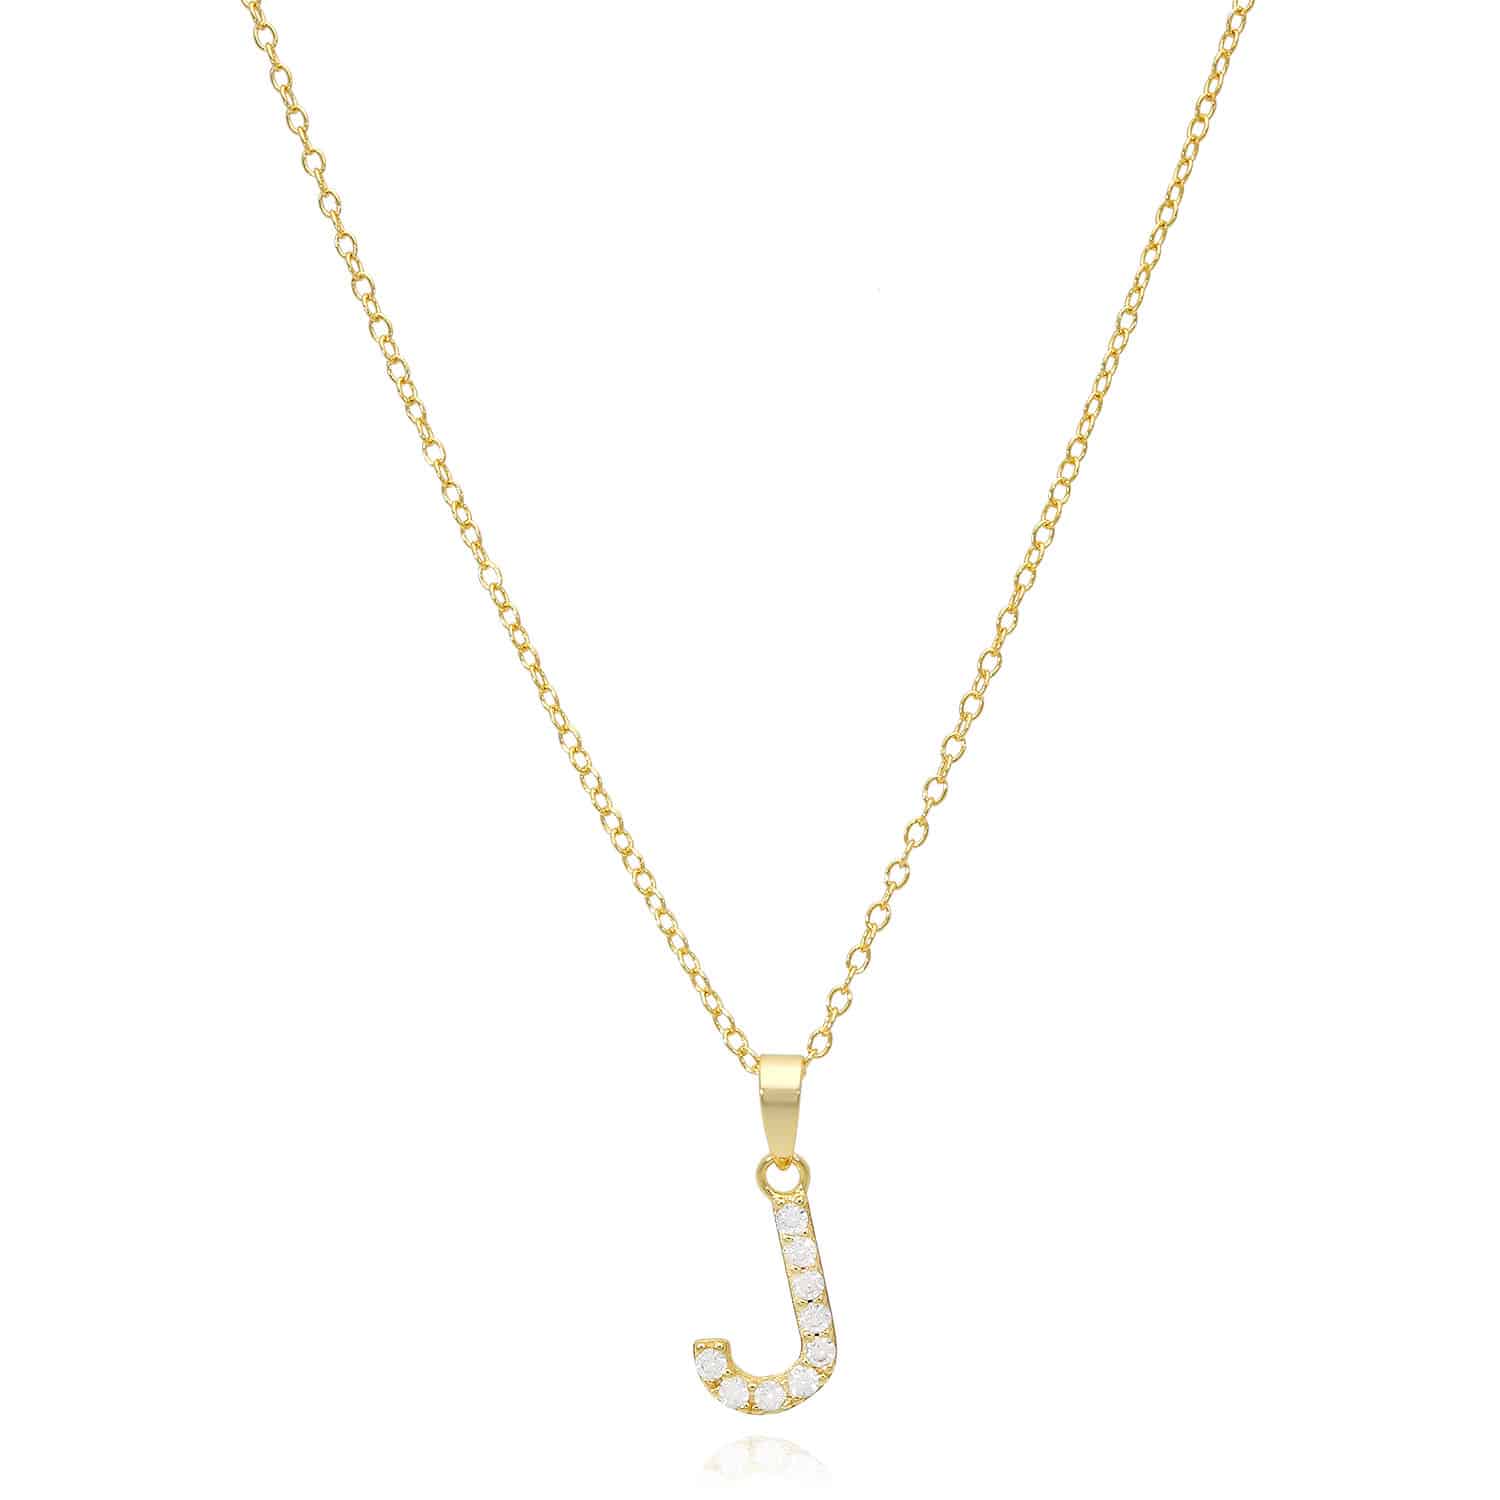 18K Yellow Gold Over Silver Cable Necklace 18" Initial Letter Pendant 0.7" - J